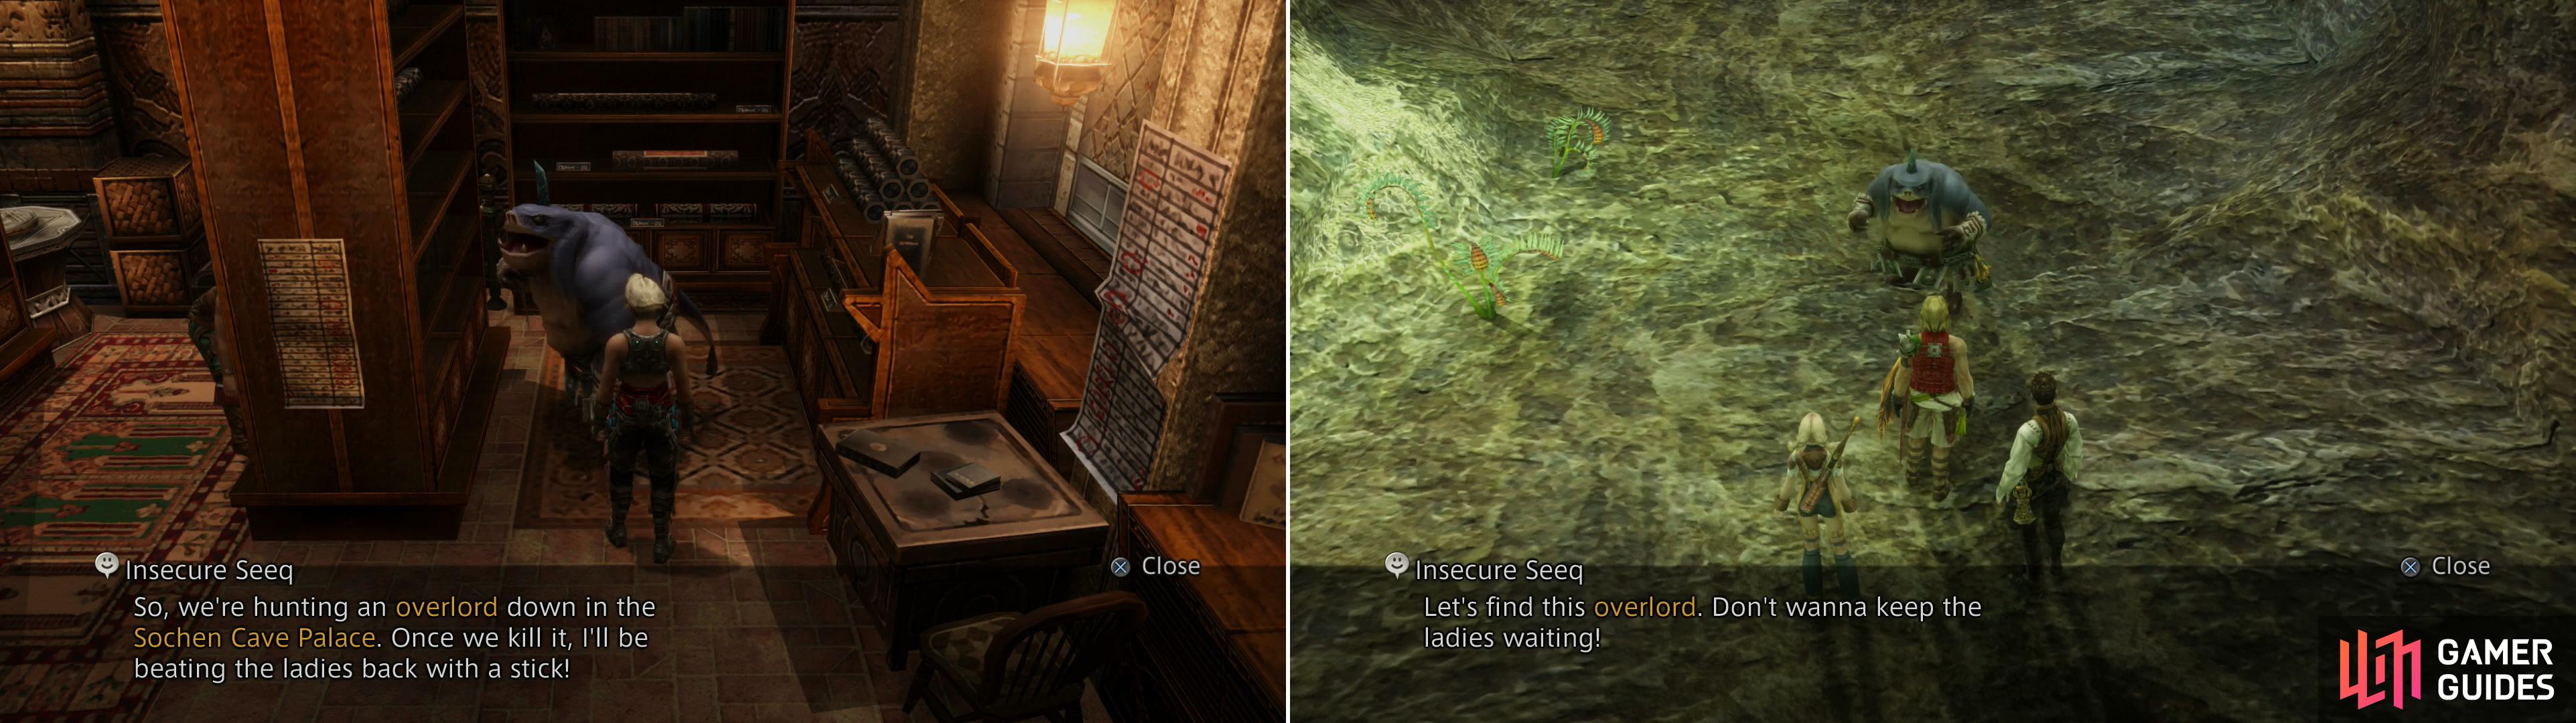 Talk to the Insecure Seeq and he’ll tell you his plan (left) then join him in the Sochen Cave Palace (right).